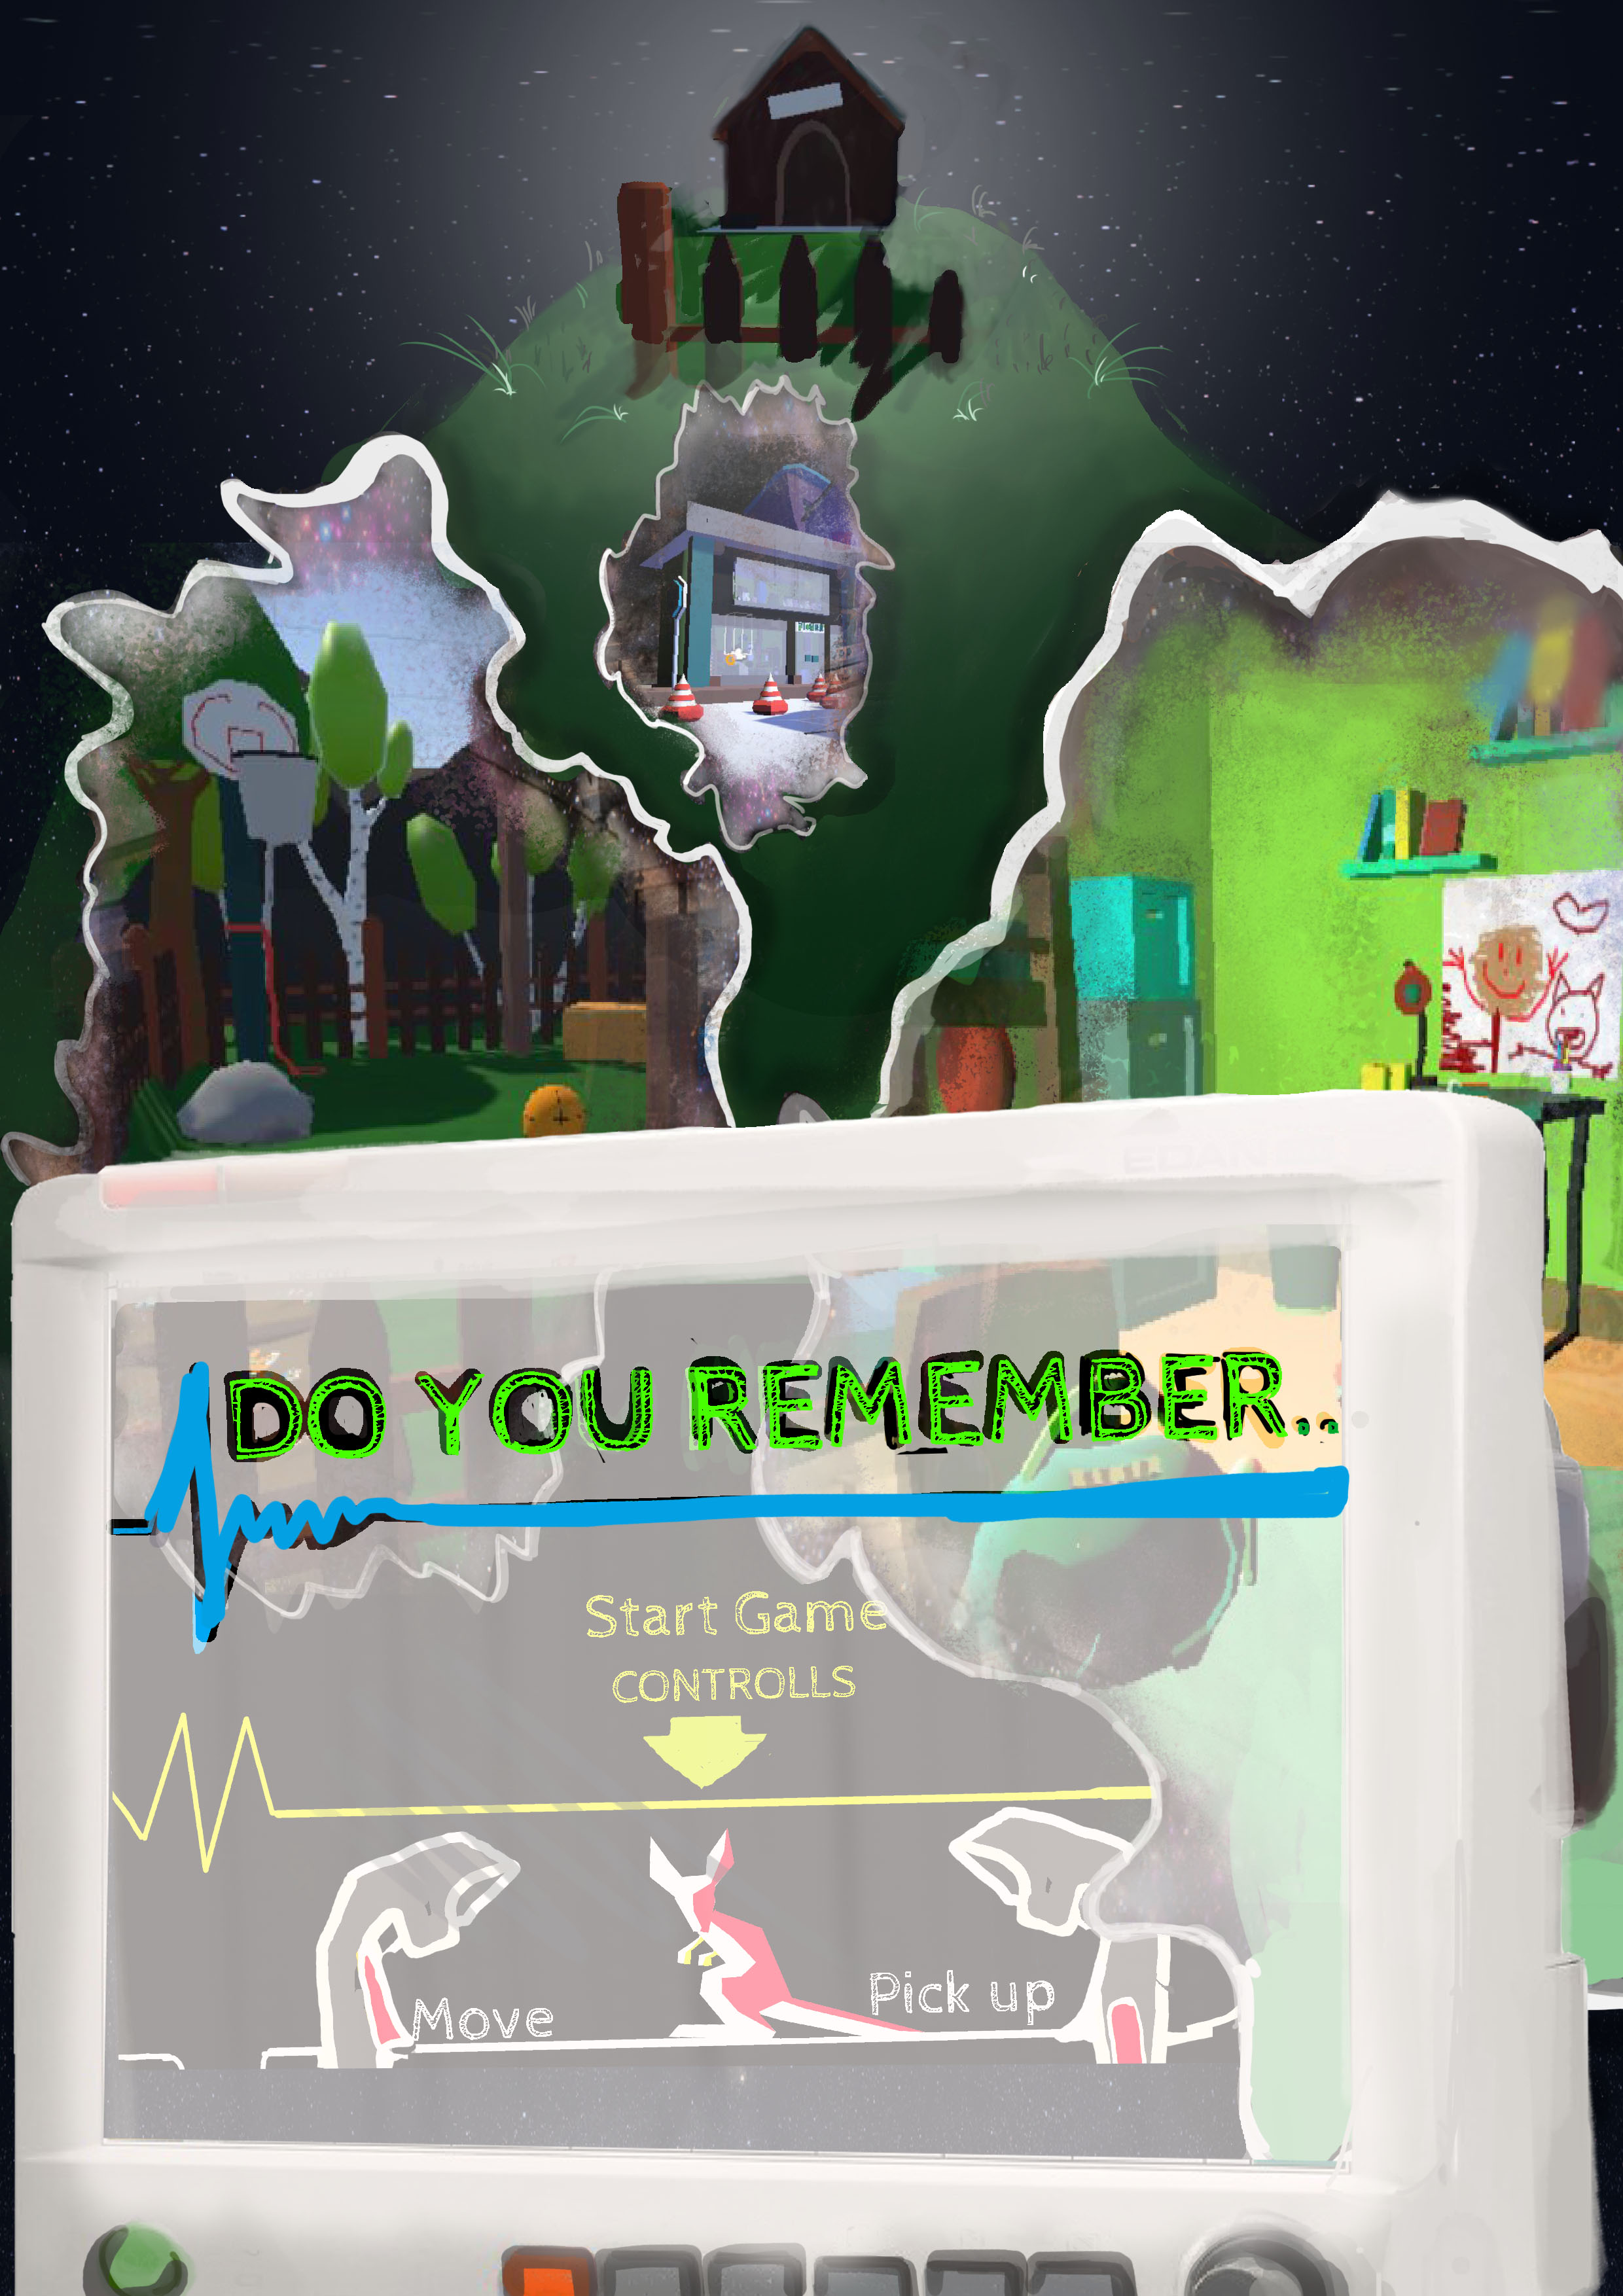 Do you remember...